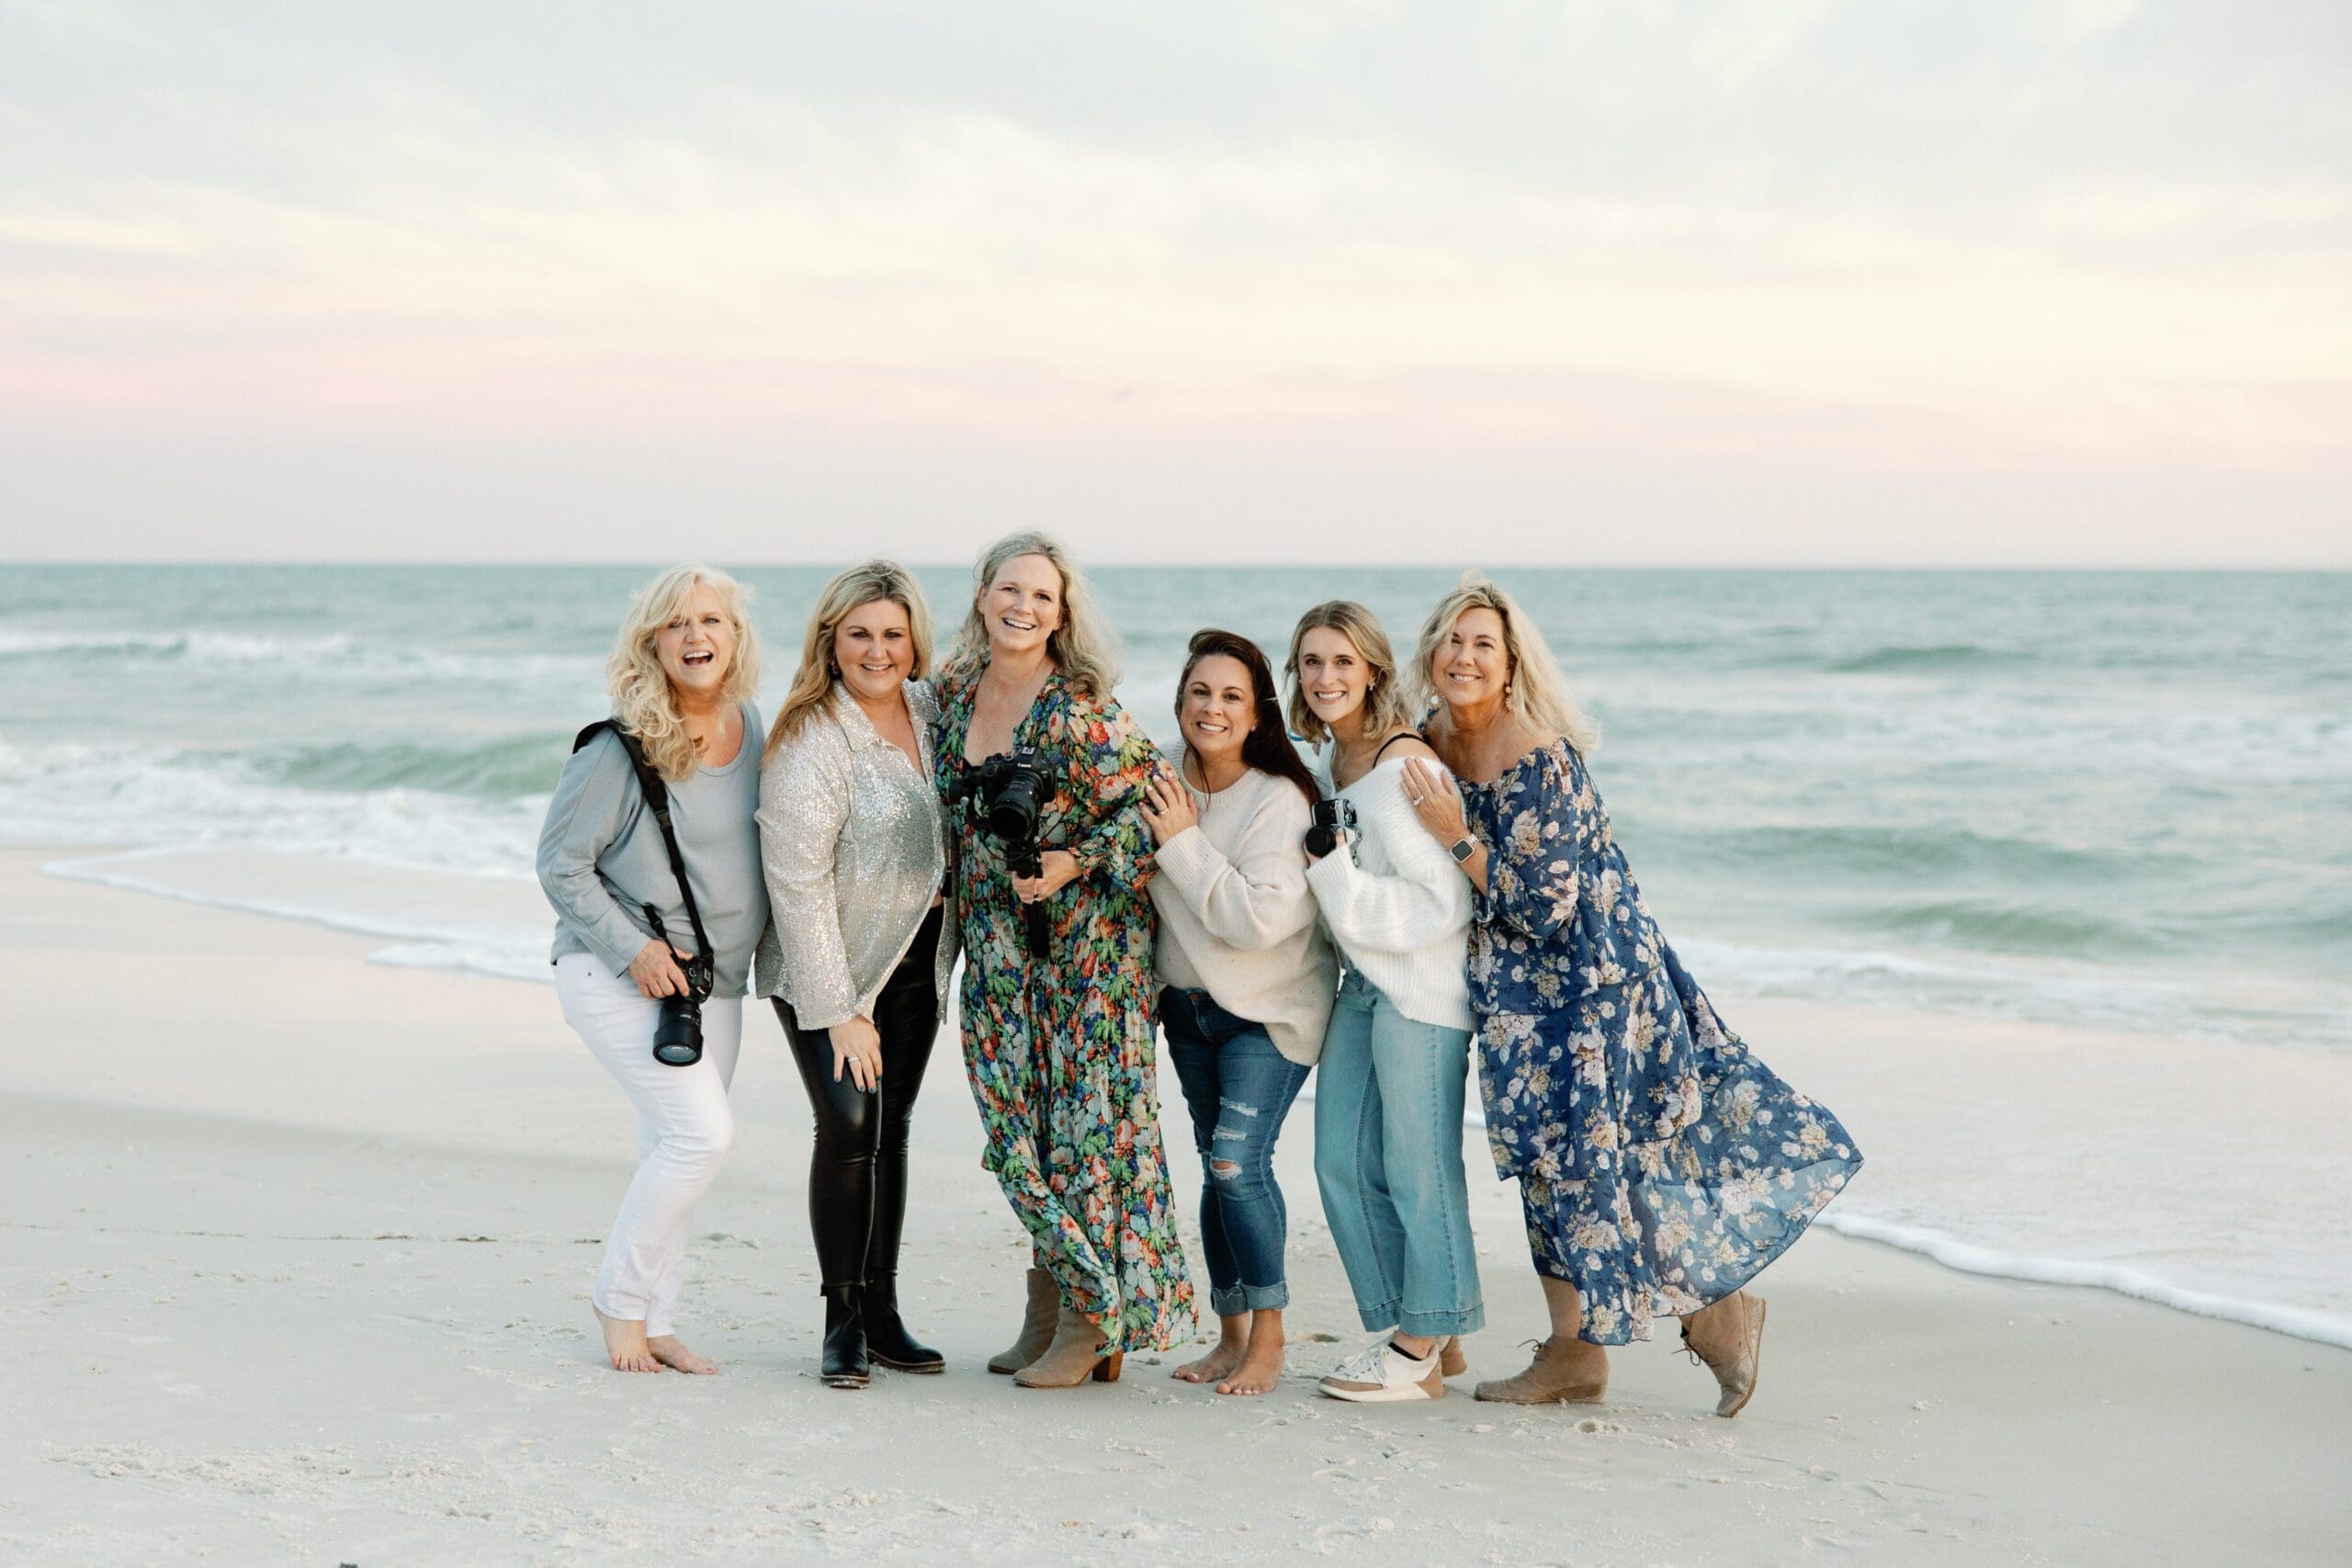 A group of women attending a photography retreat on Rosemary Beach, posing for a photo.